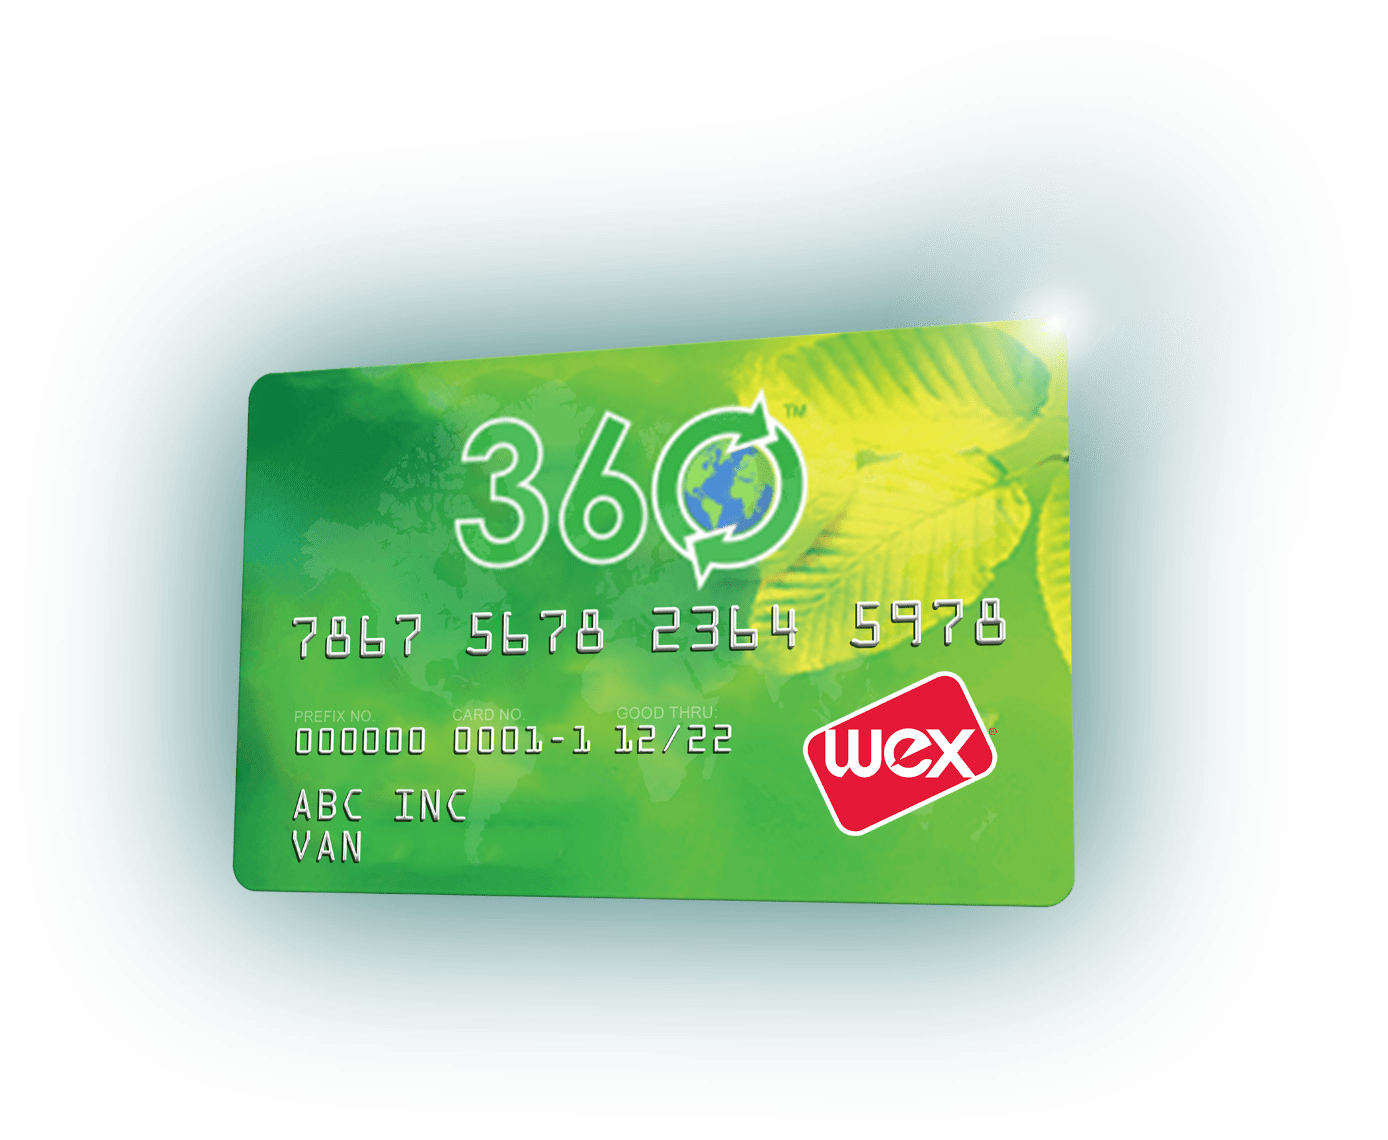 Fleet Fuel Cards For Small Businesses 360fuelcard